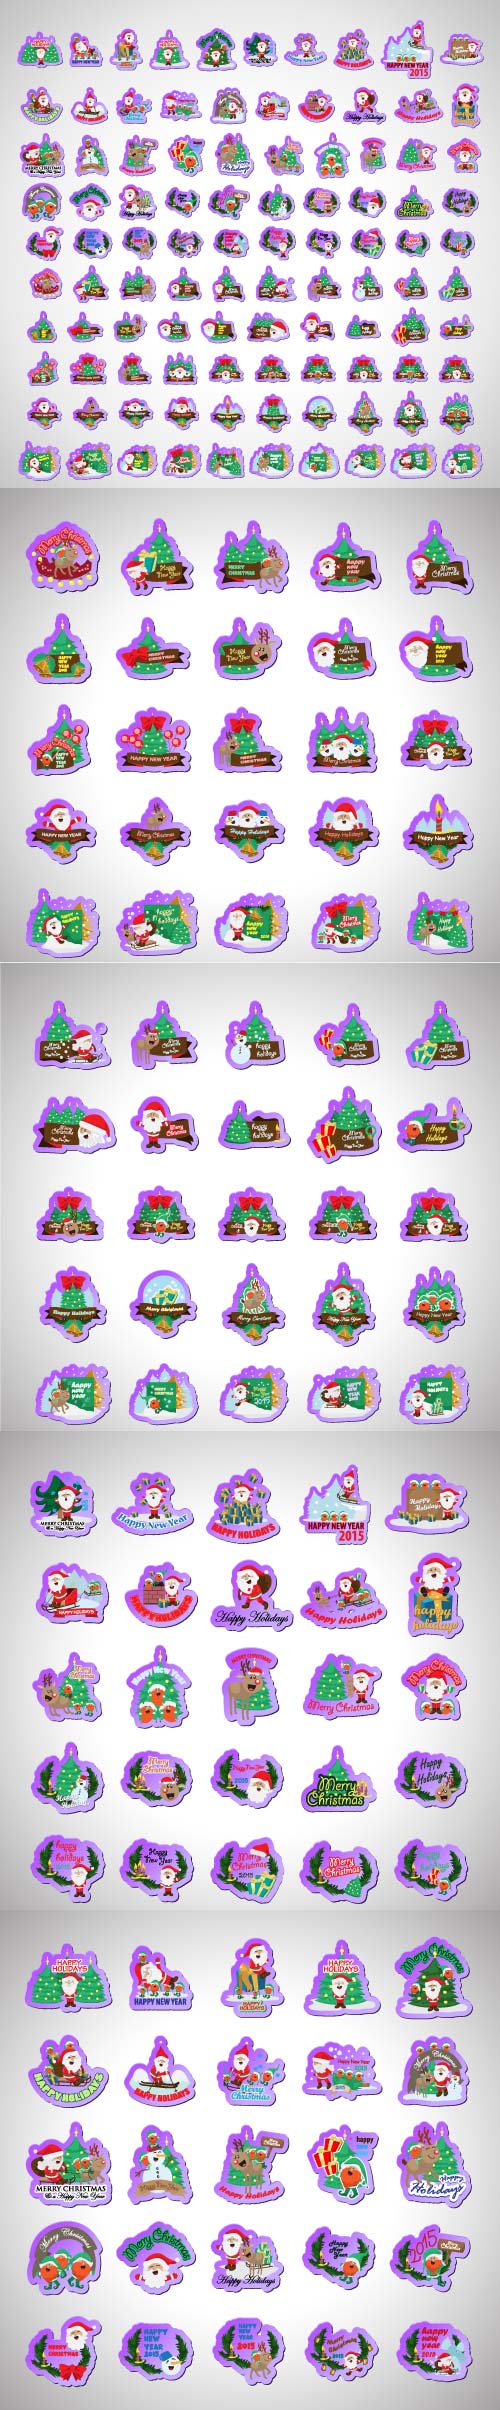 Christmas icons and elements vector set